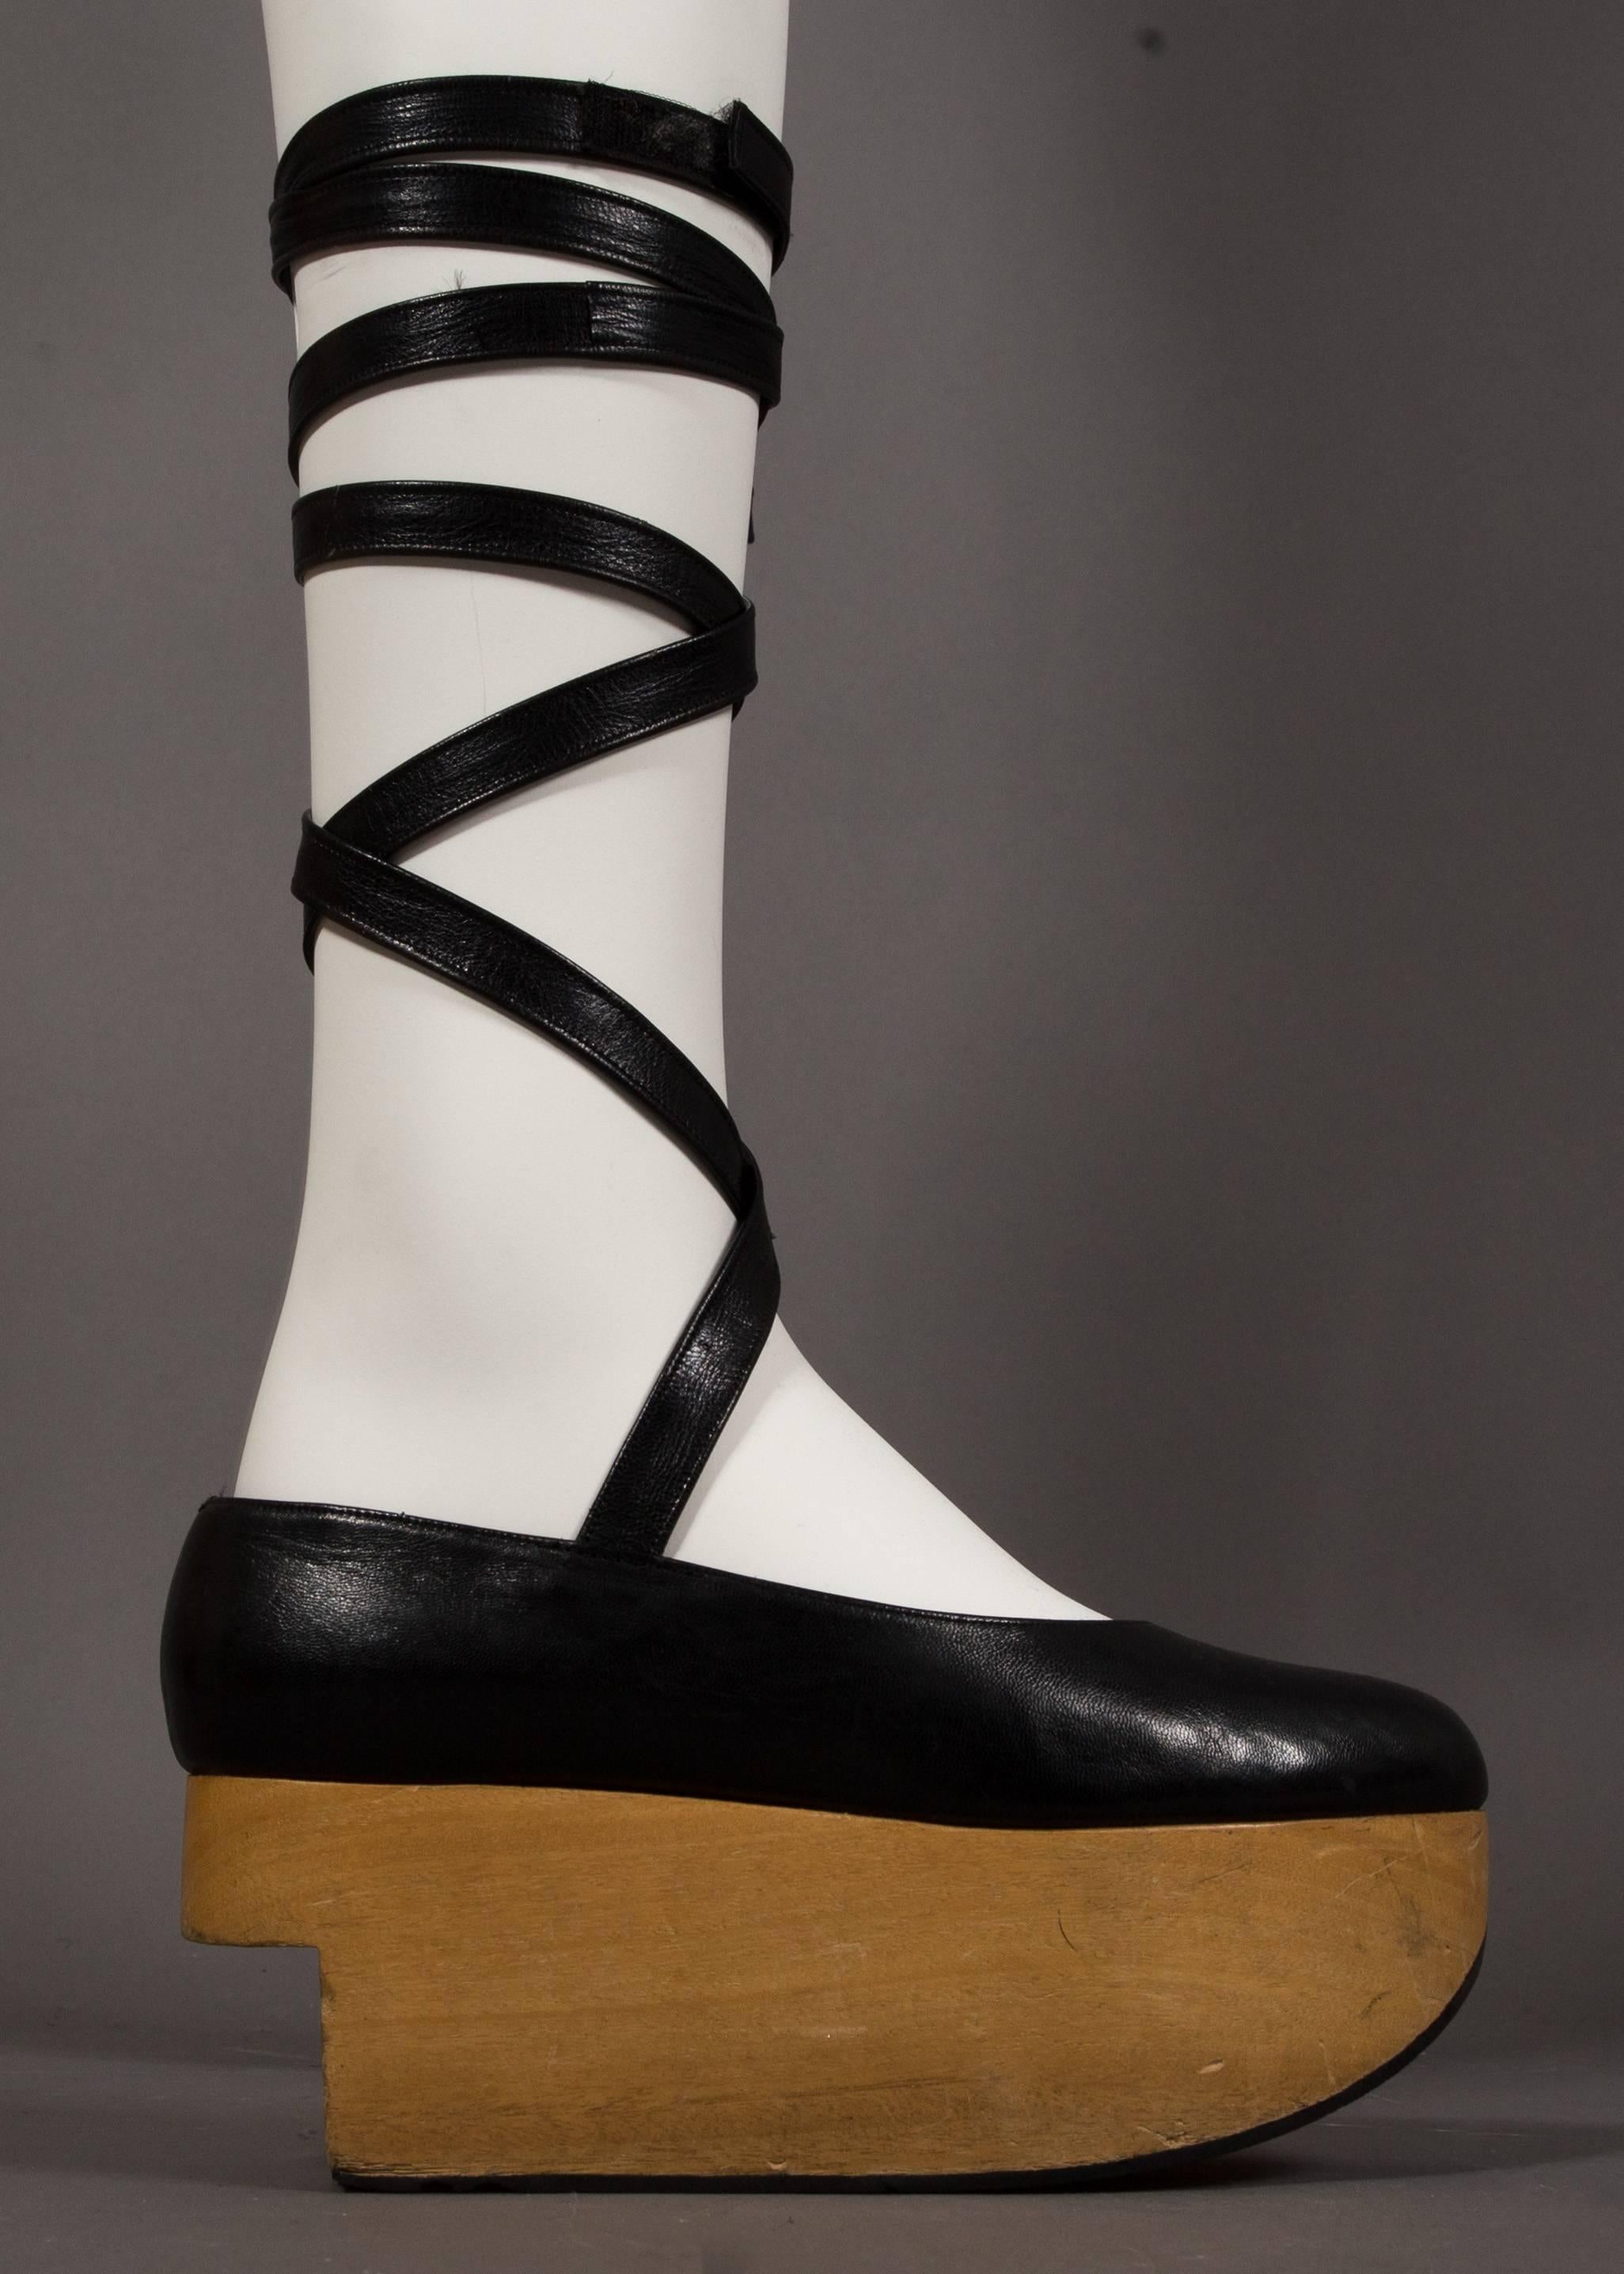 A rare pair of Vivienne Westwod black leather 'Rocking Horse' shoes with wooden platforms and extra long ankle straps, circa 1980s. 